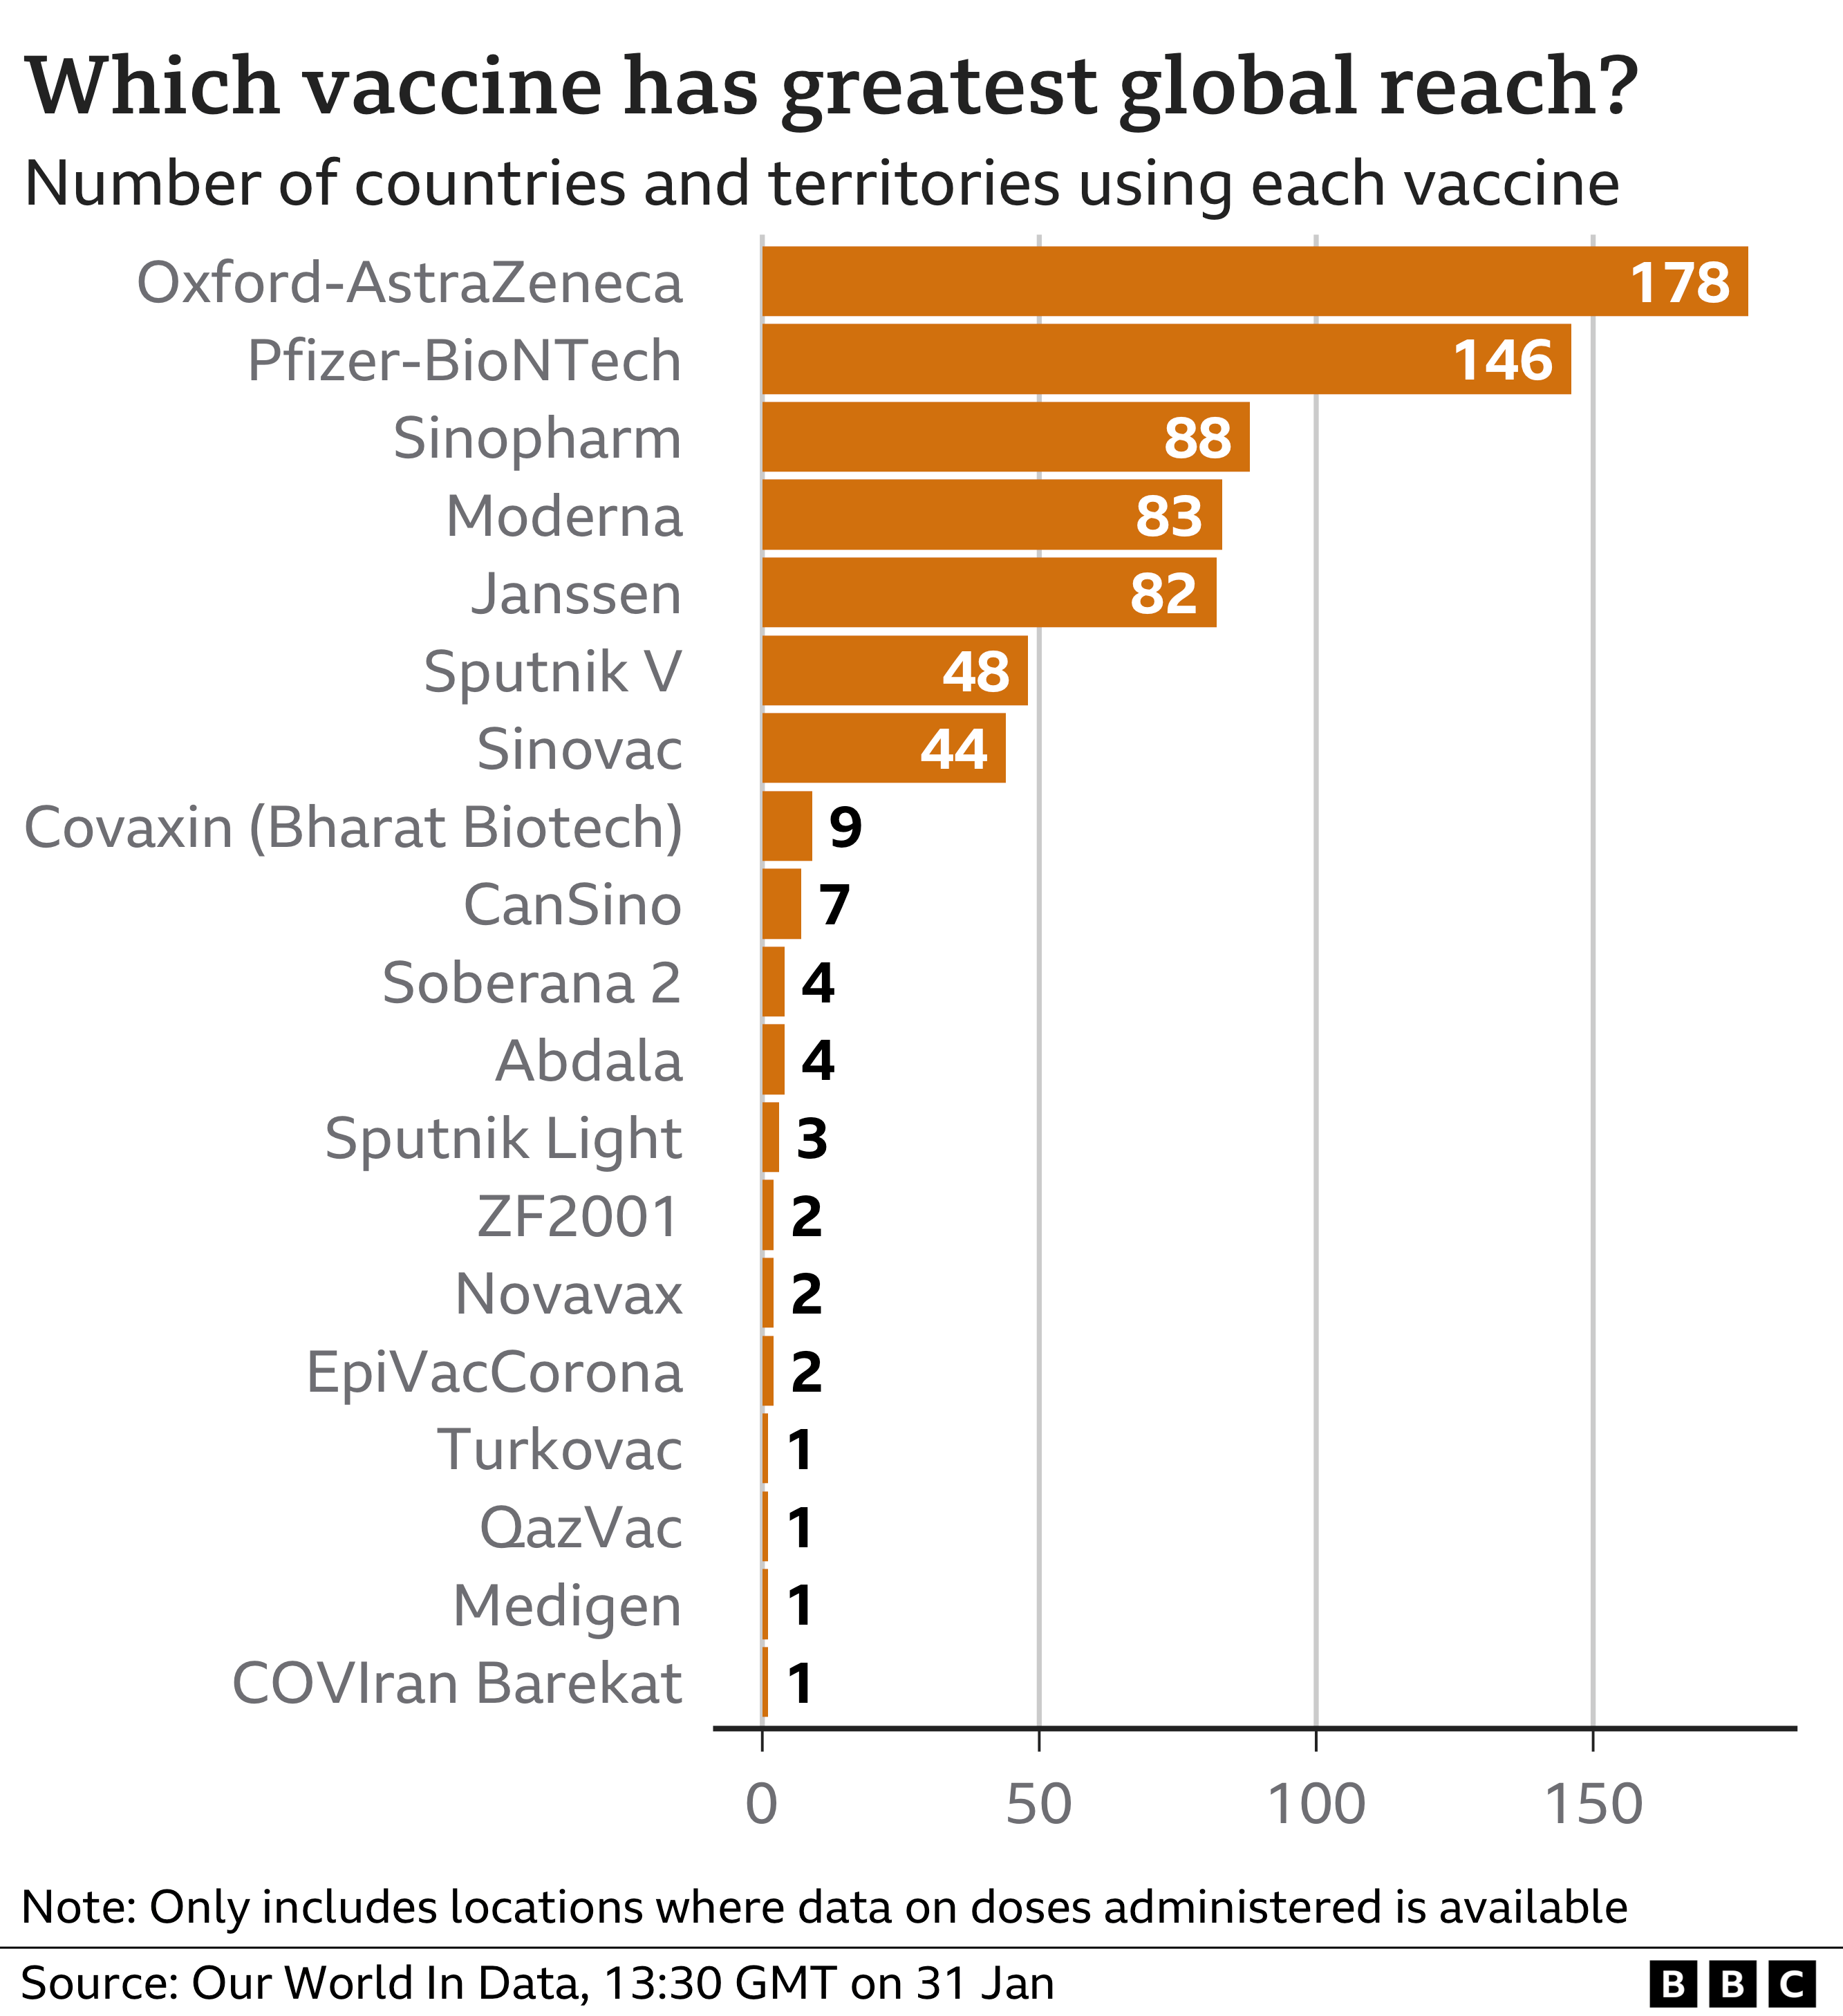 Chart showing which vaccines are being used the most: Oxford-AstraZeneca top, followed by Pfizer-BioNTech